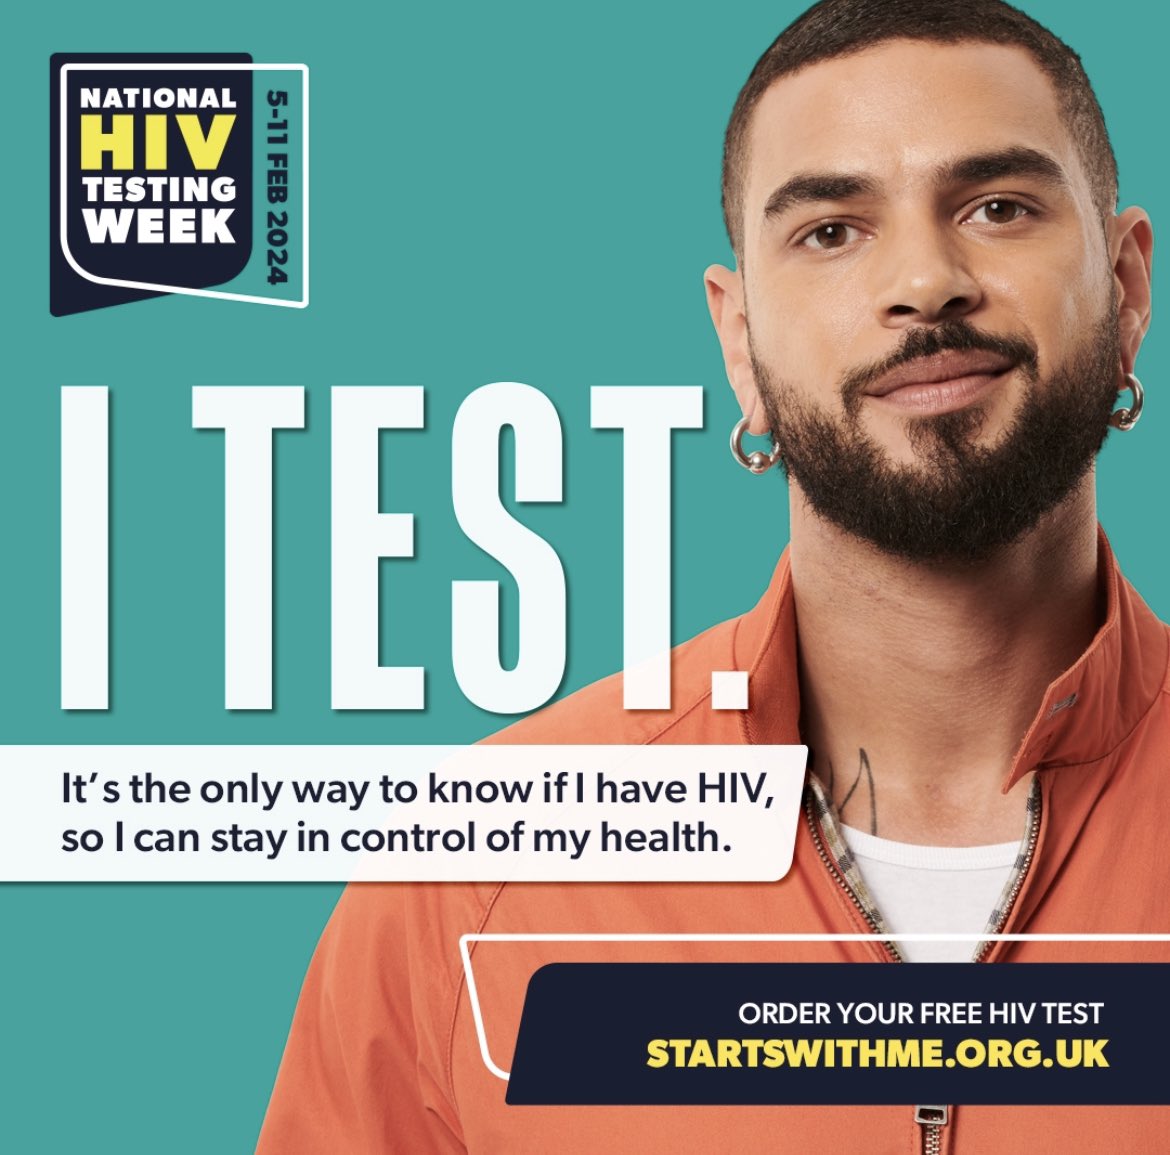 The best things in life are free. Order your free HIV test kit to do at home in just a couple of clicks from freetesting.hiv 📱 The only way to know if you’re living with HIV is to get tested. Take action this #HIVTestingWeek.